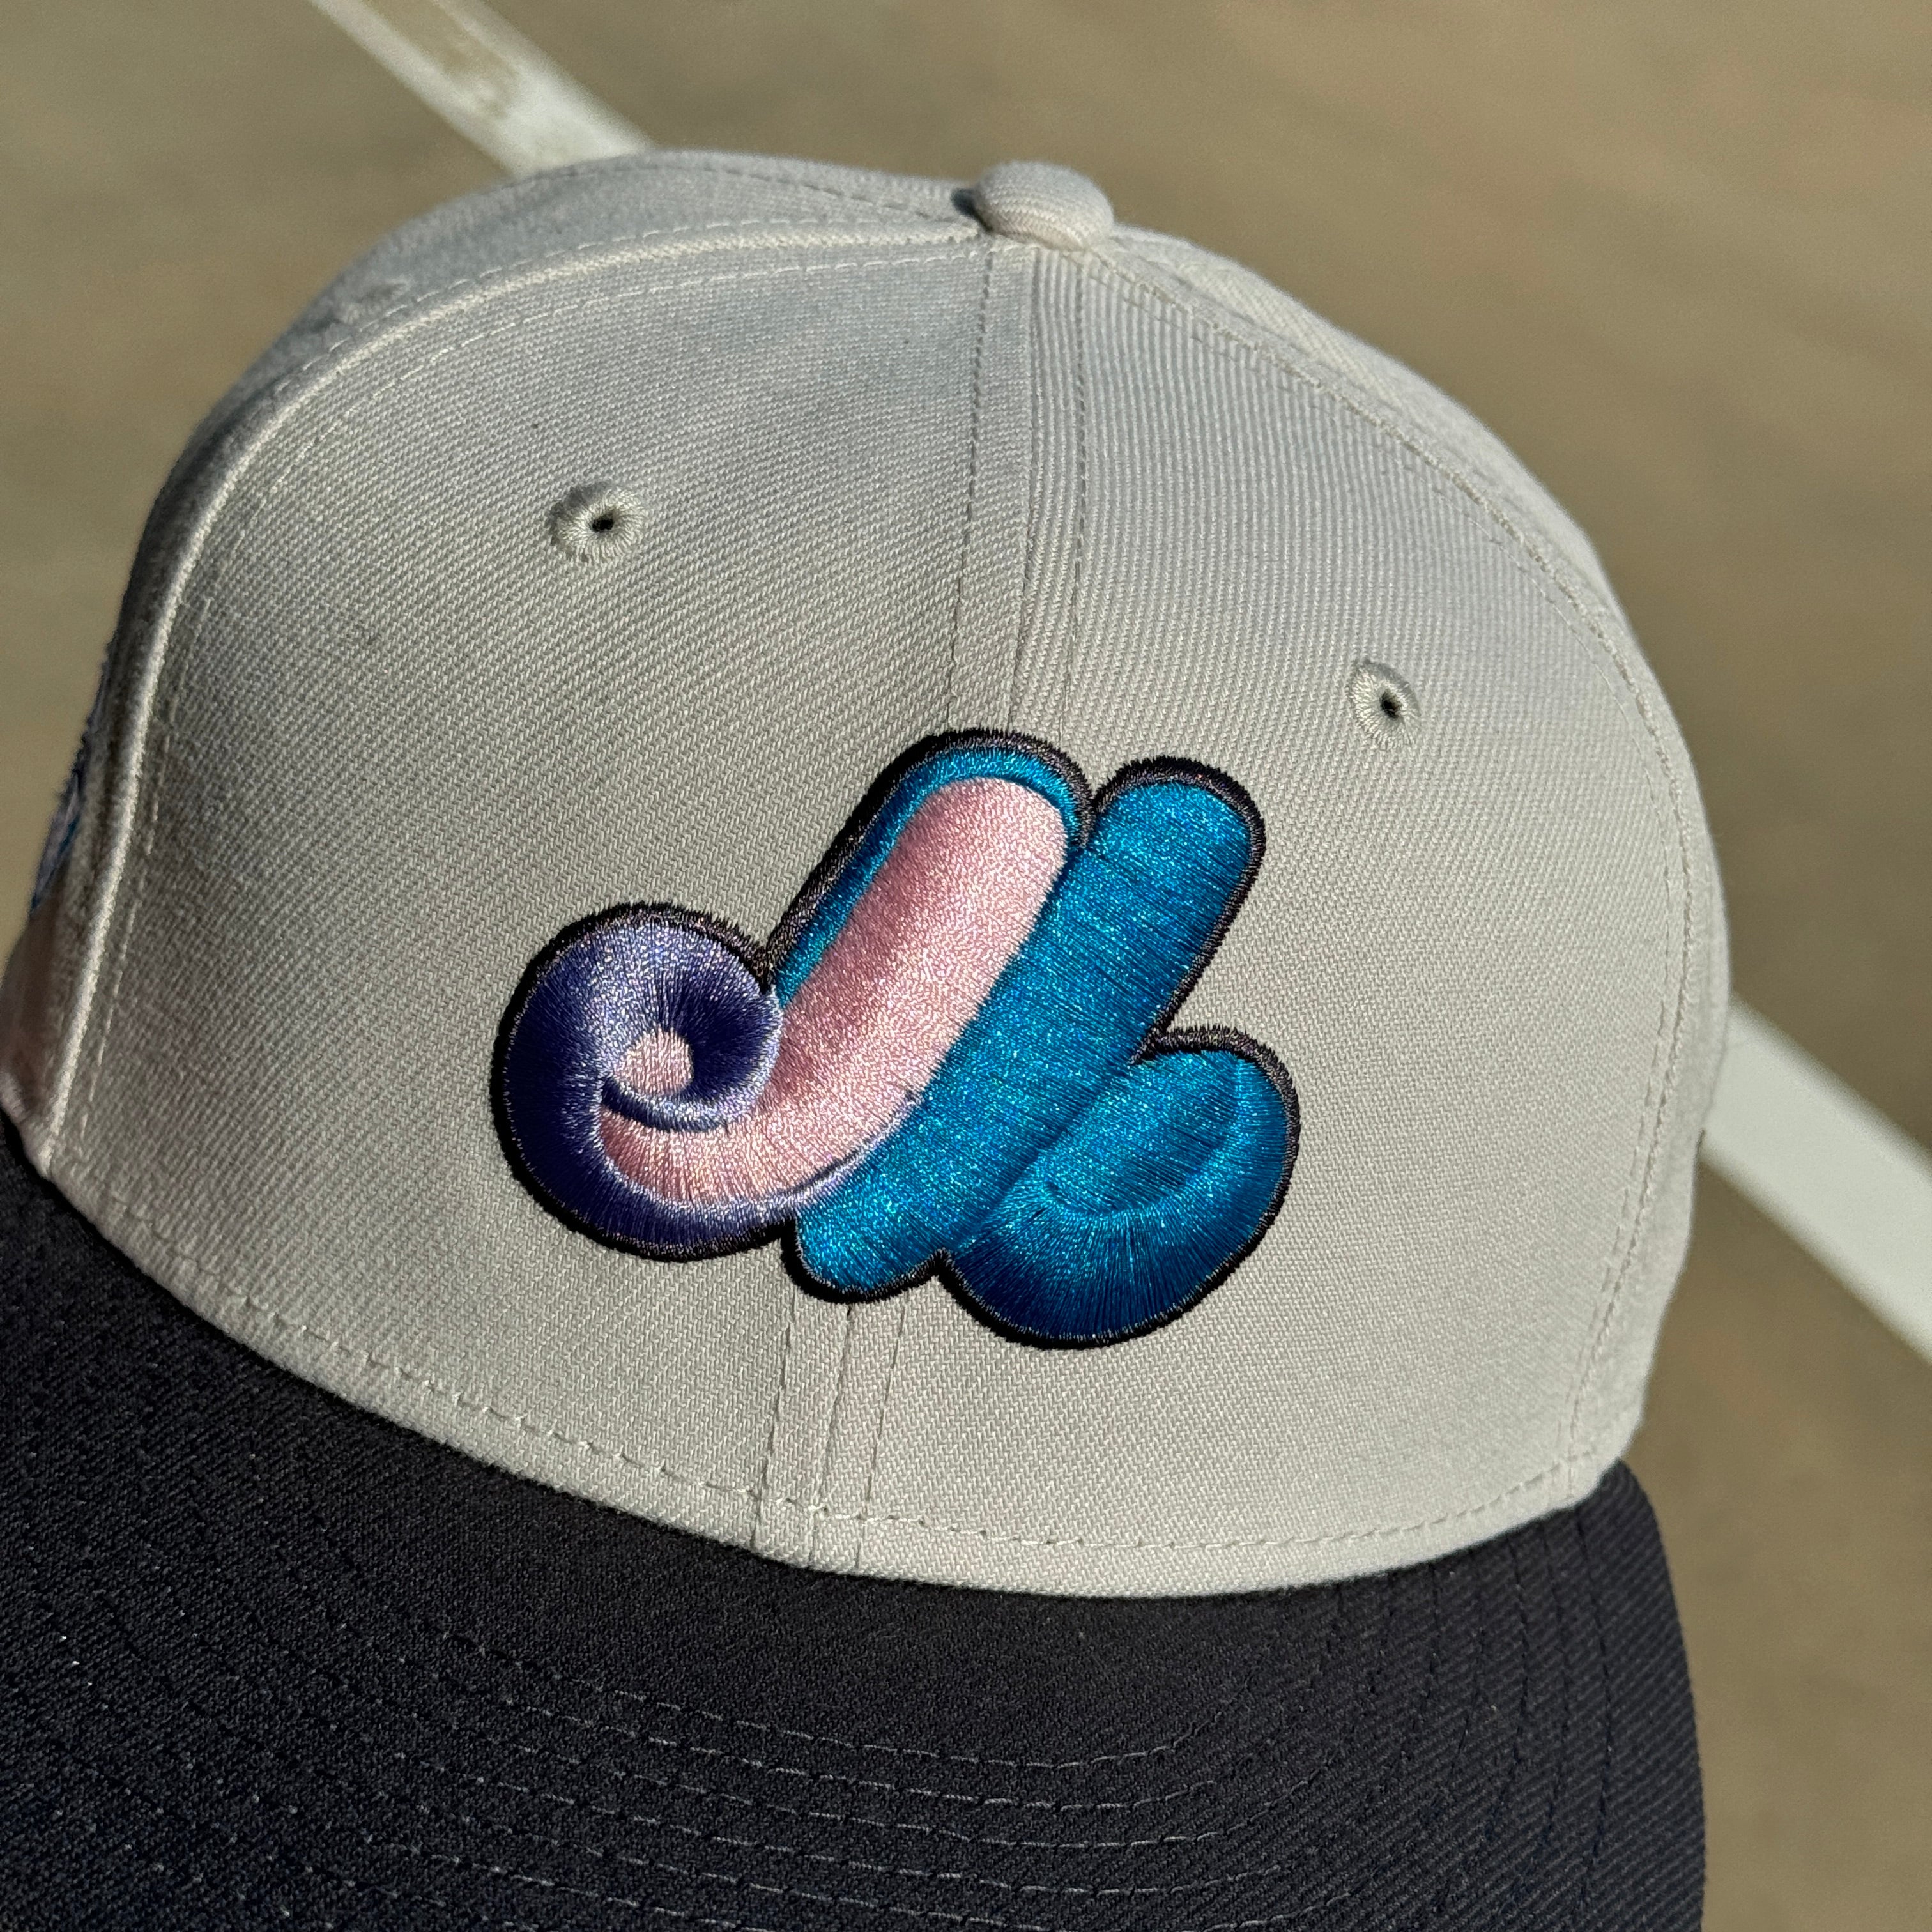 USED 1/8 Stone Montreal Toronto Expos 35th Anniversary 59fifty New Era Fitted Hat Cap